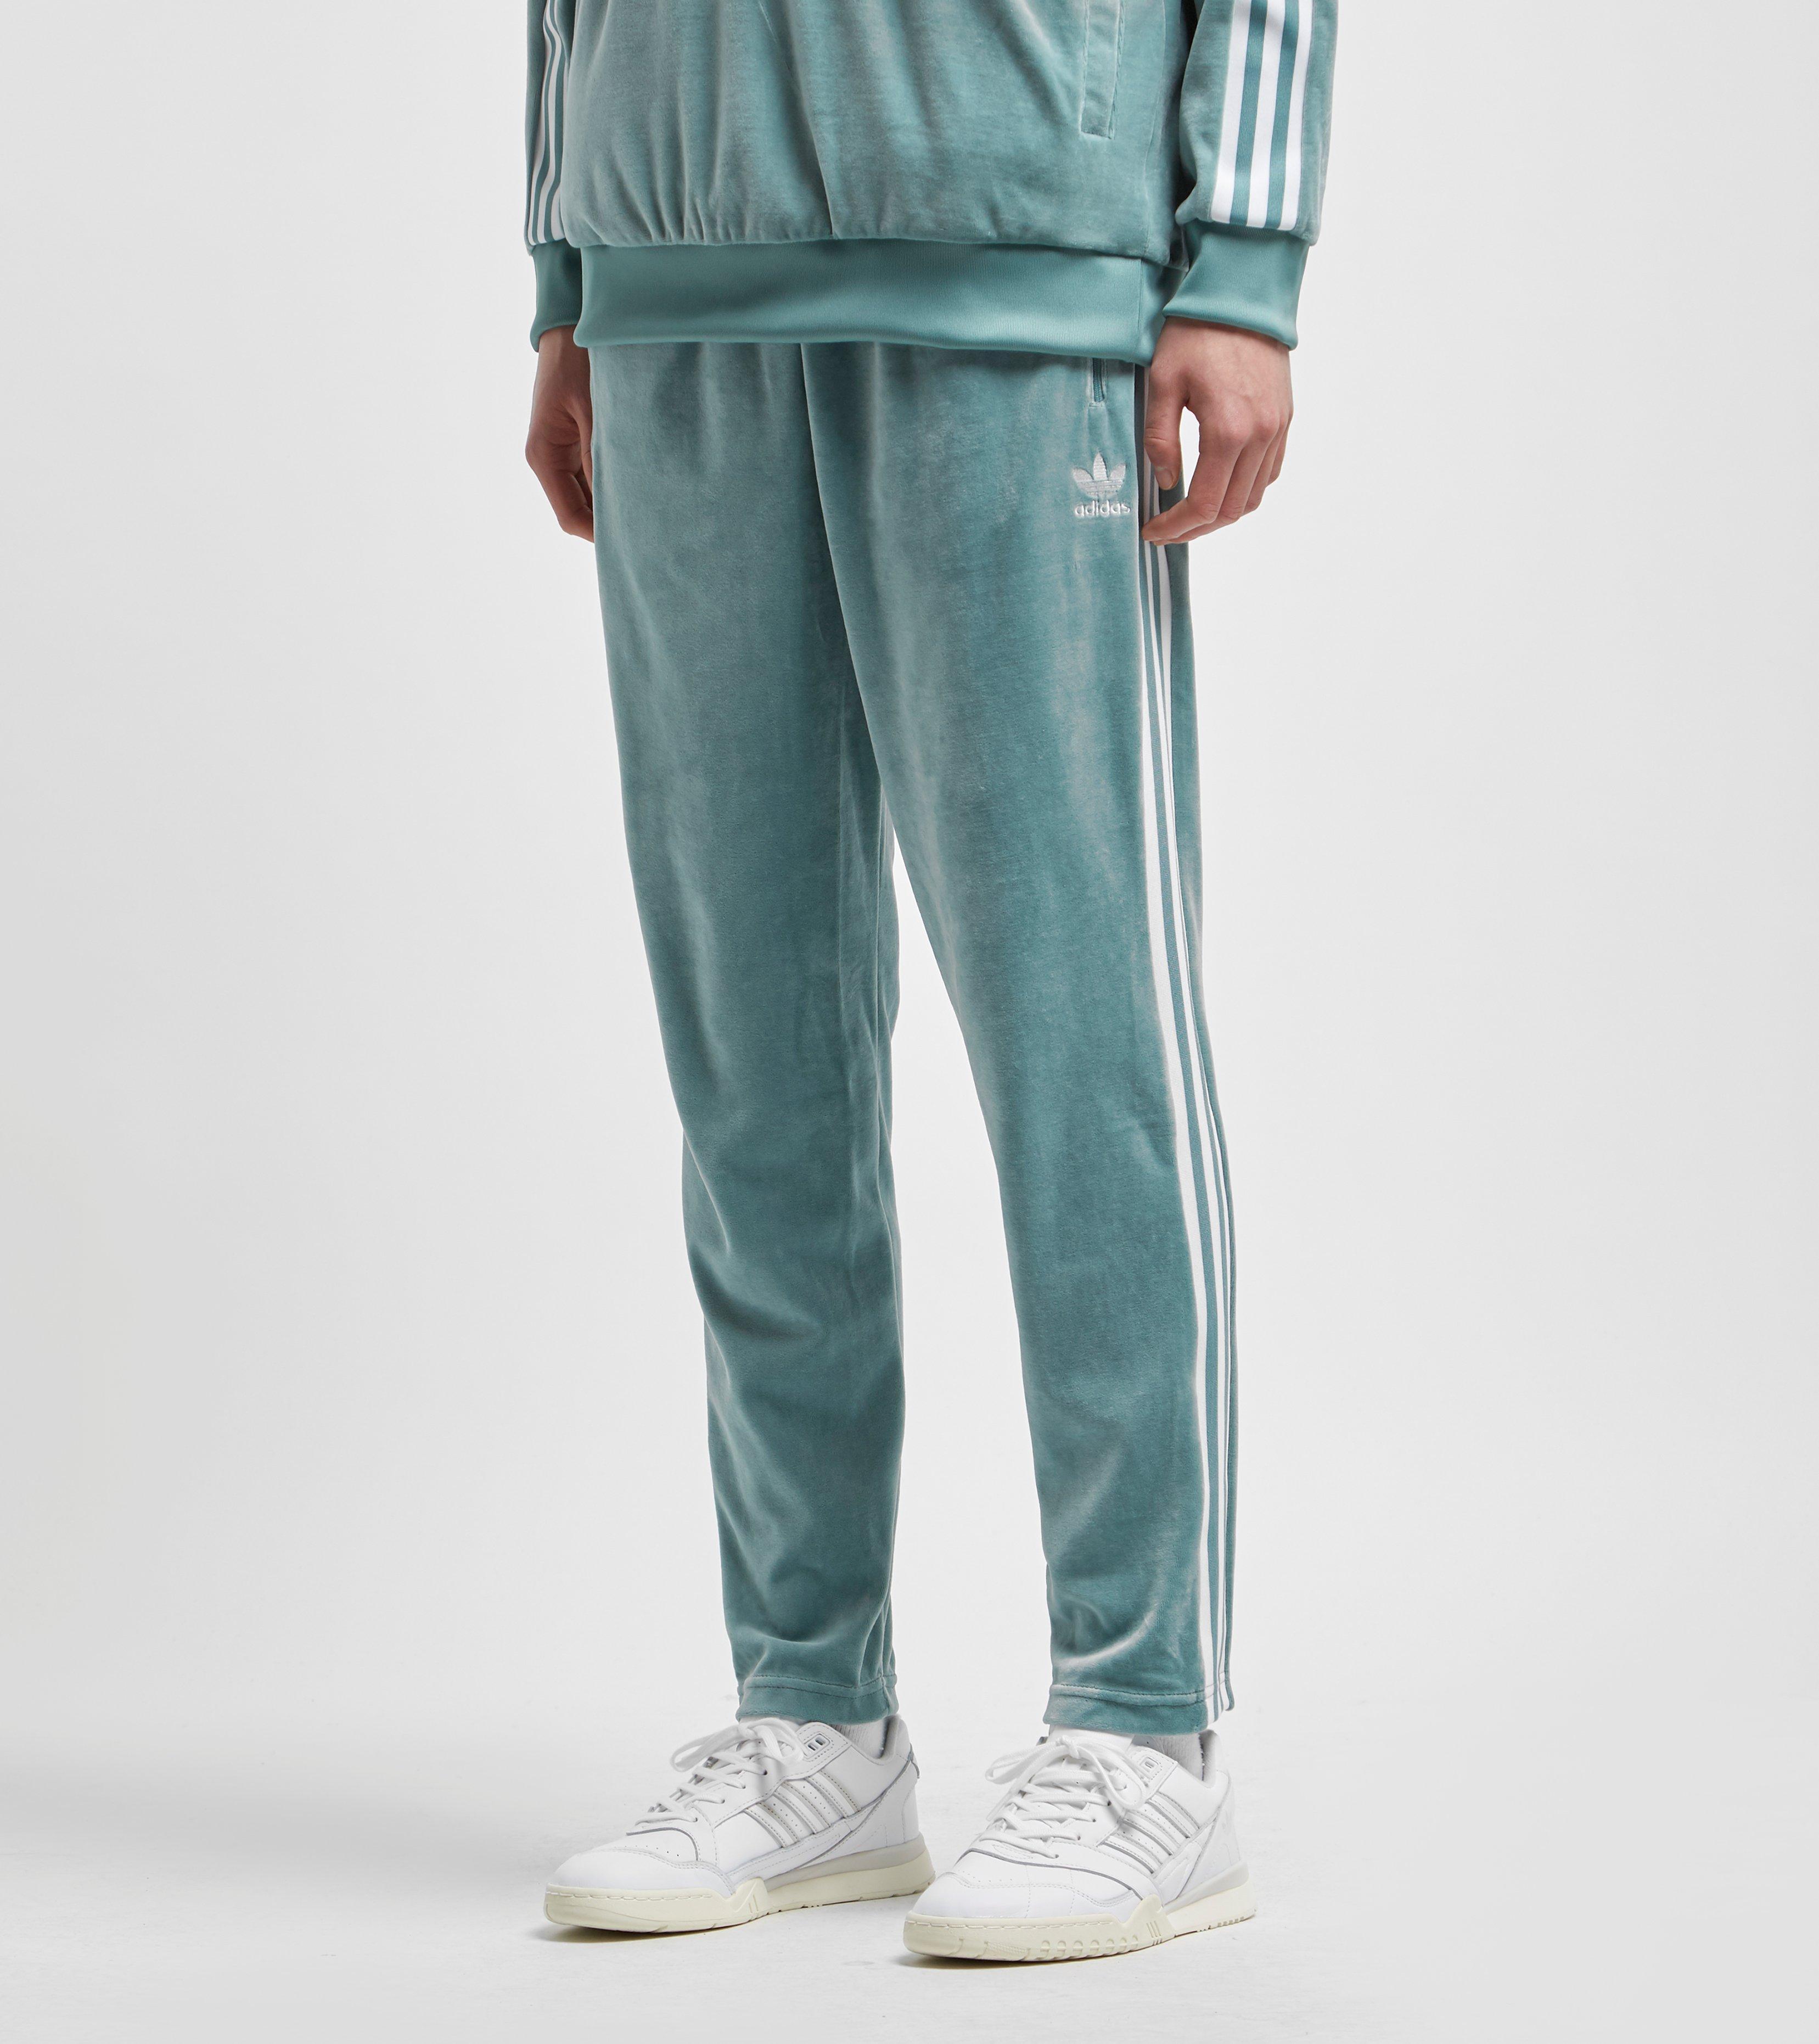 adidas cozy track pants Promotions